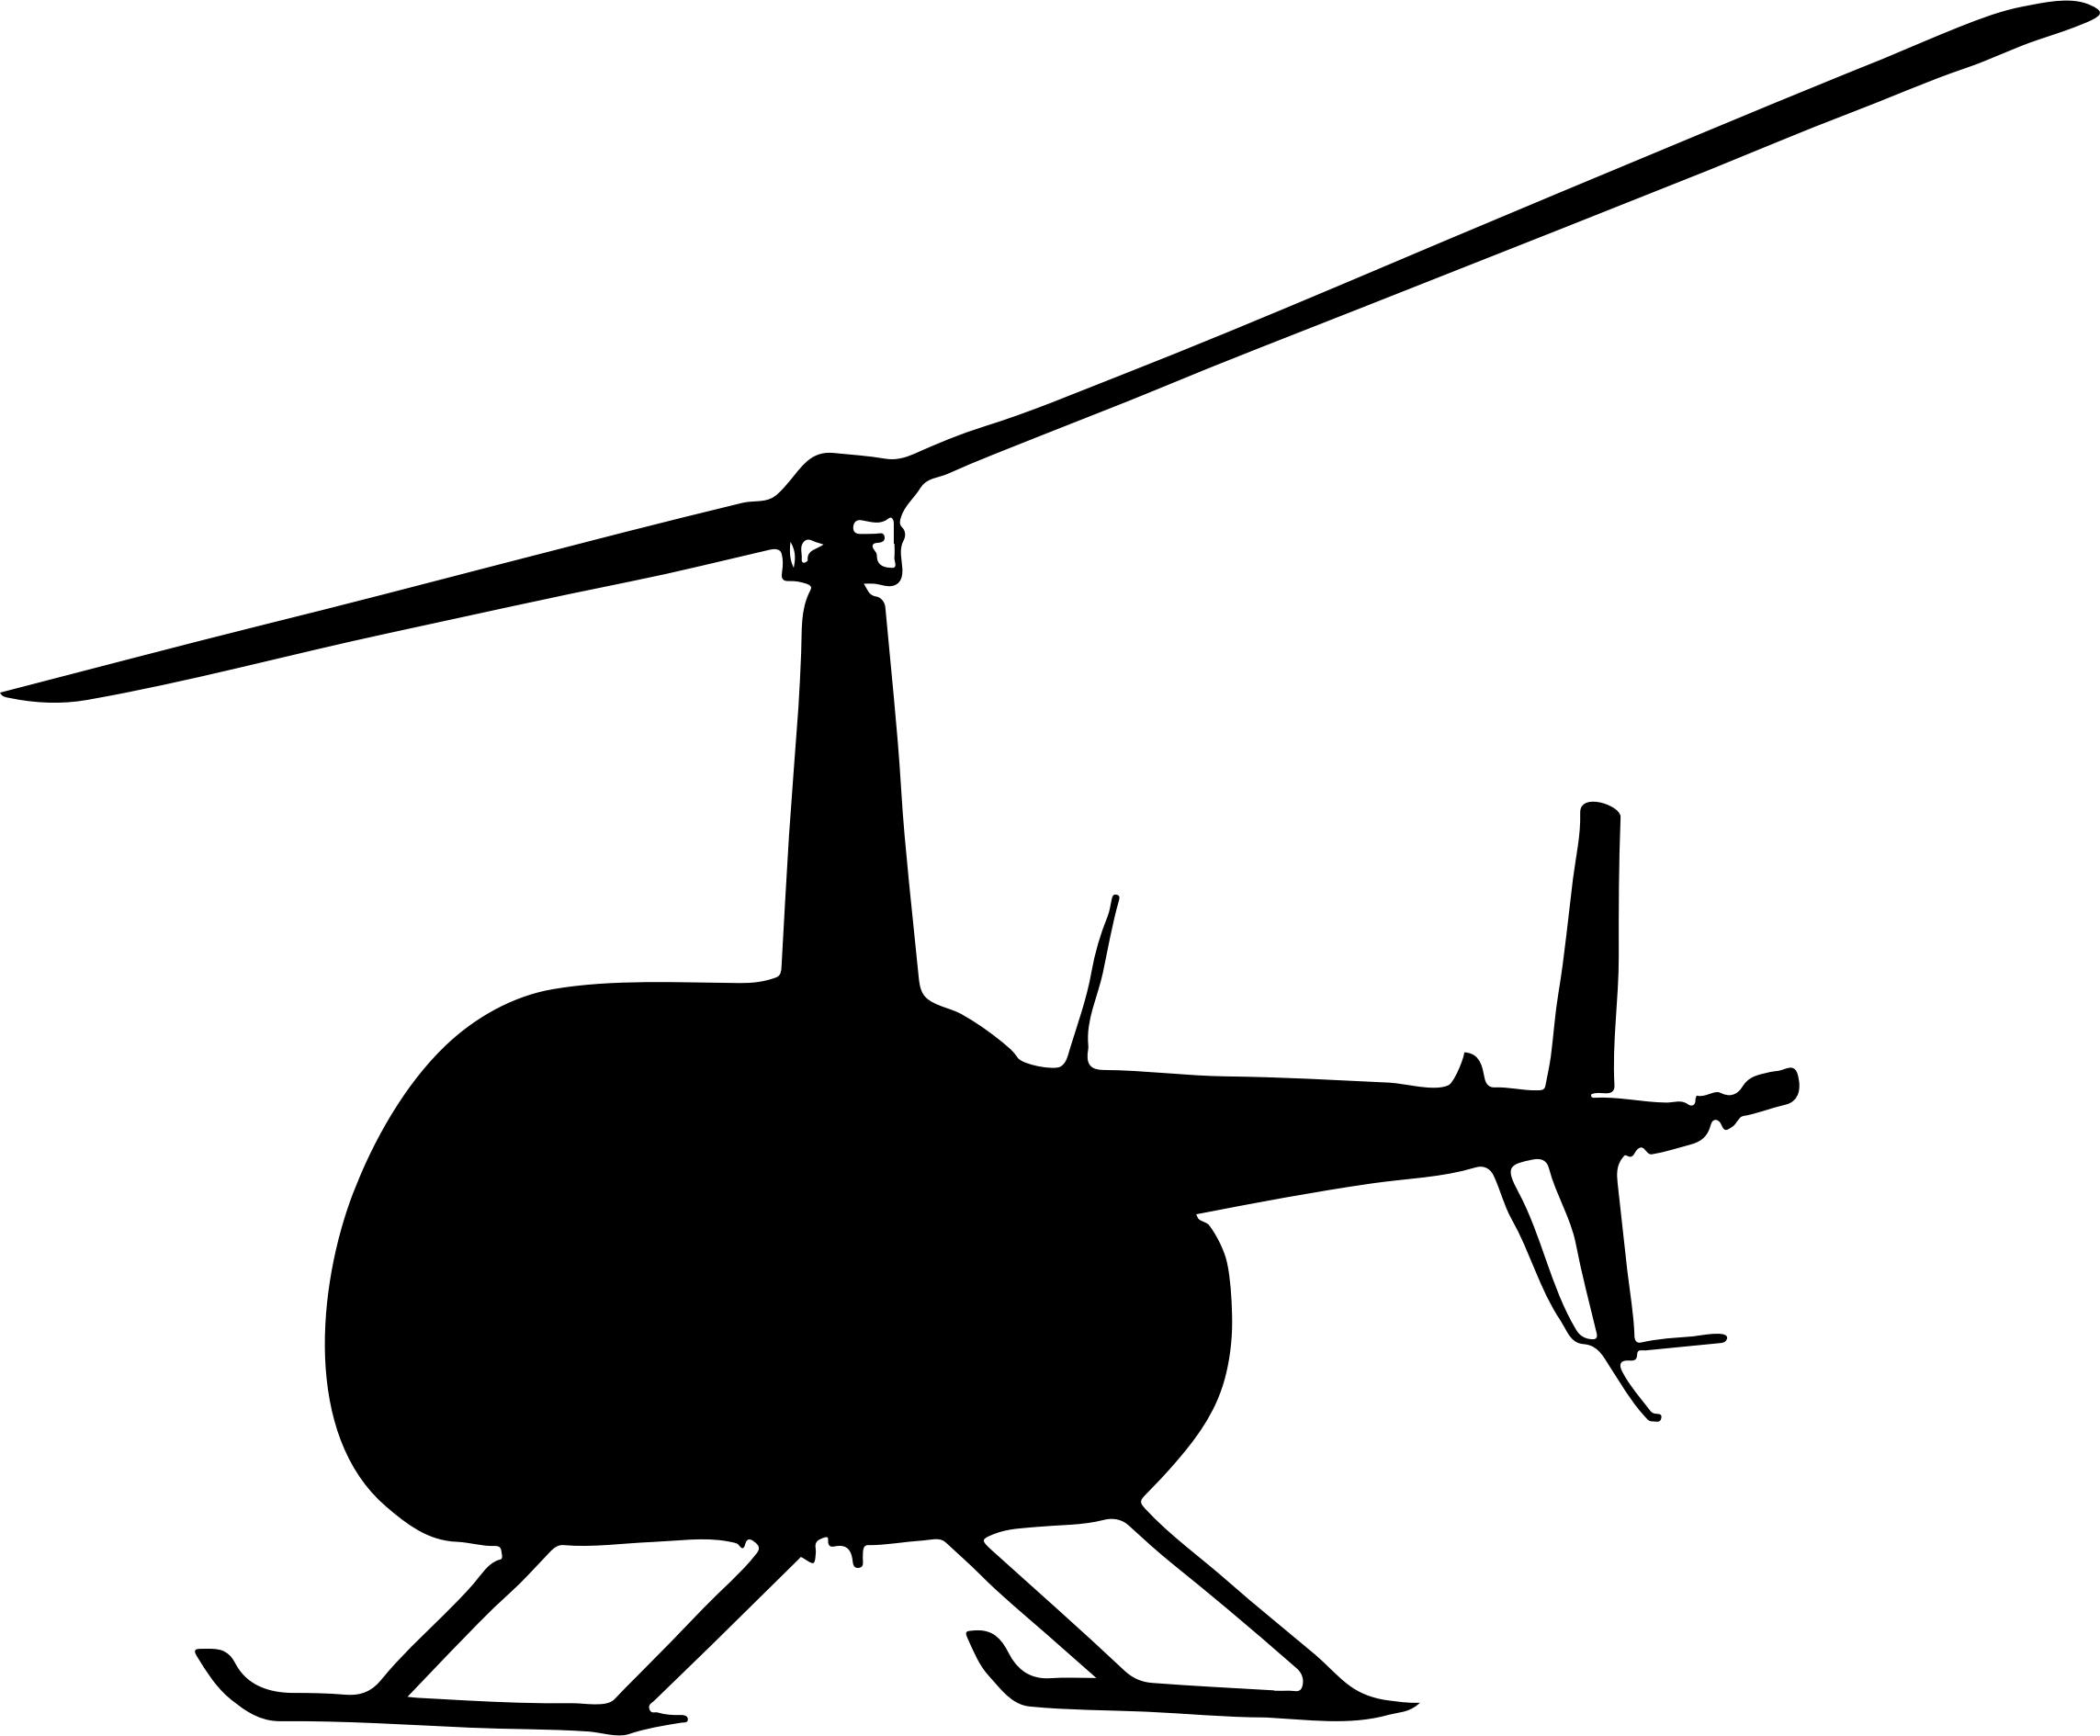 Civilian Helicopter Silhouette png